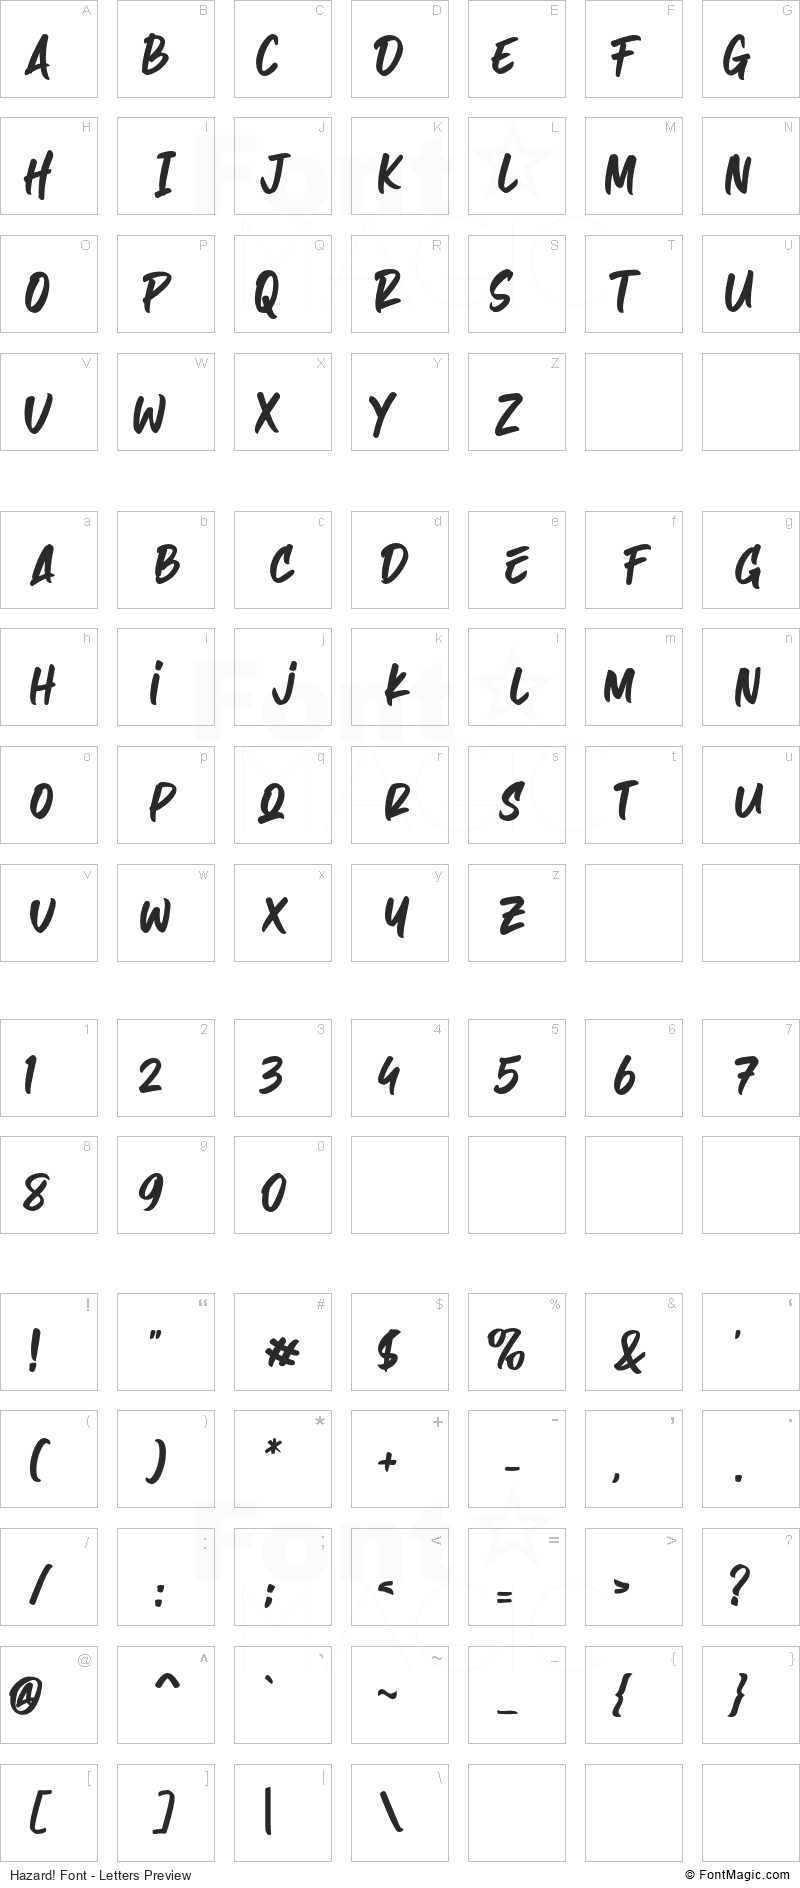 Hazard! Font - All Latters Preview Chart